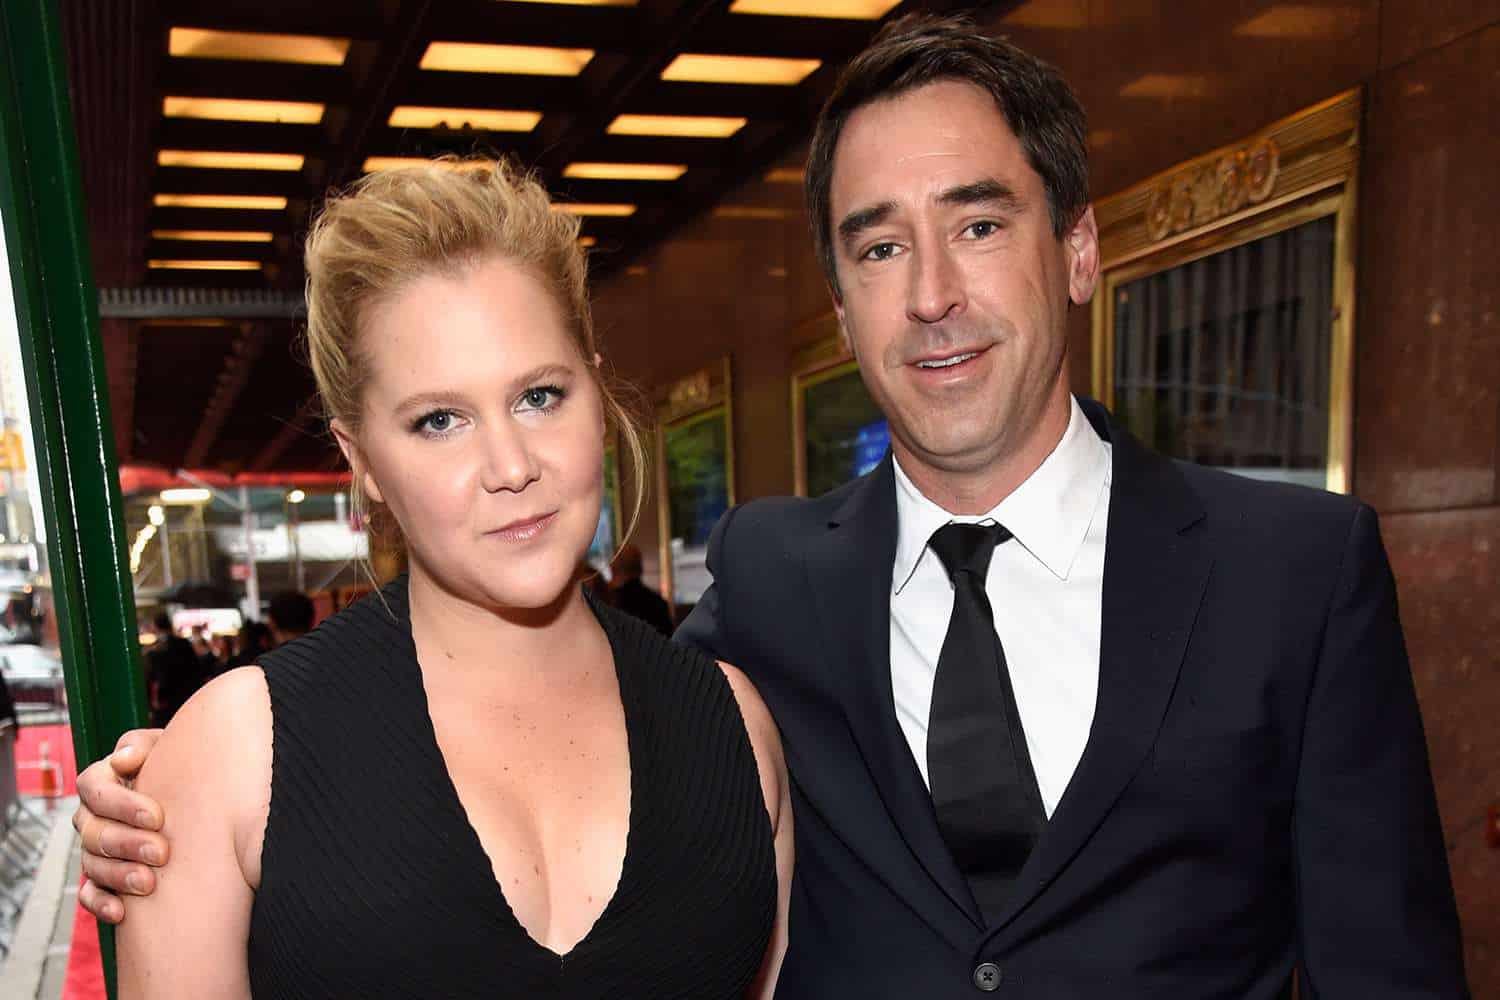 Amy Schumer's husband and her